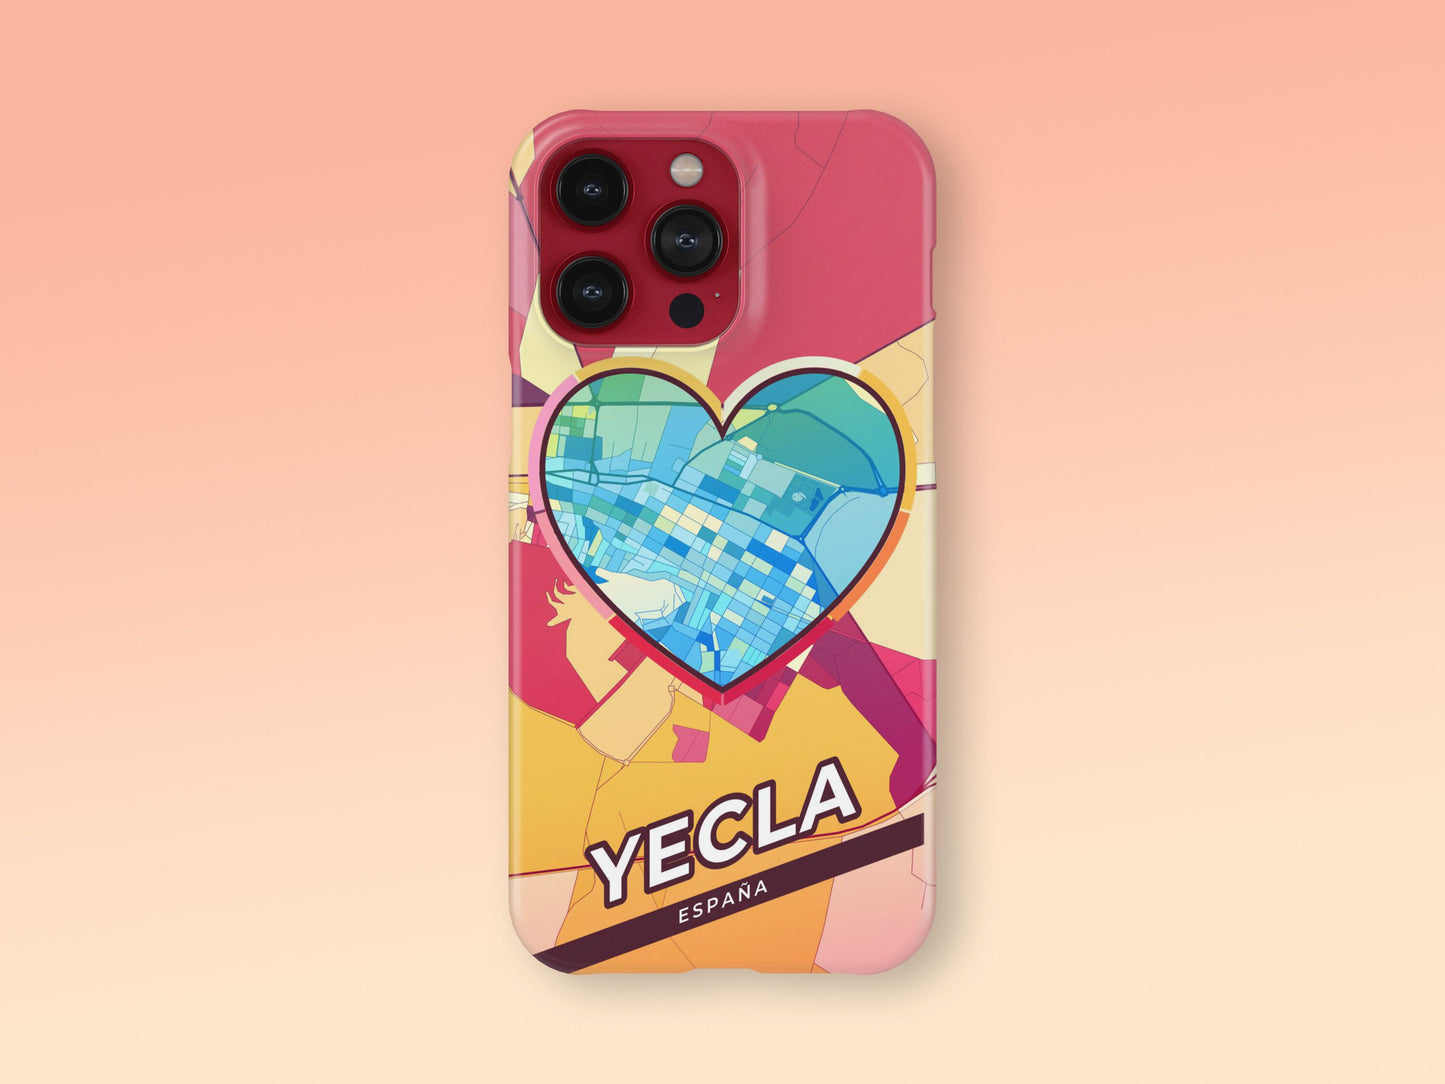 Yecla Spain slim phone case with colorful icon 2